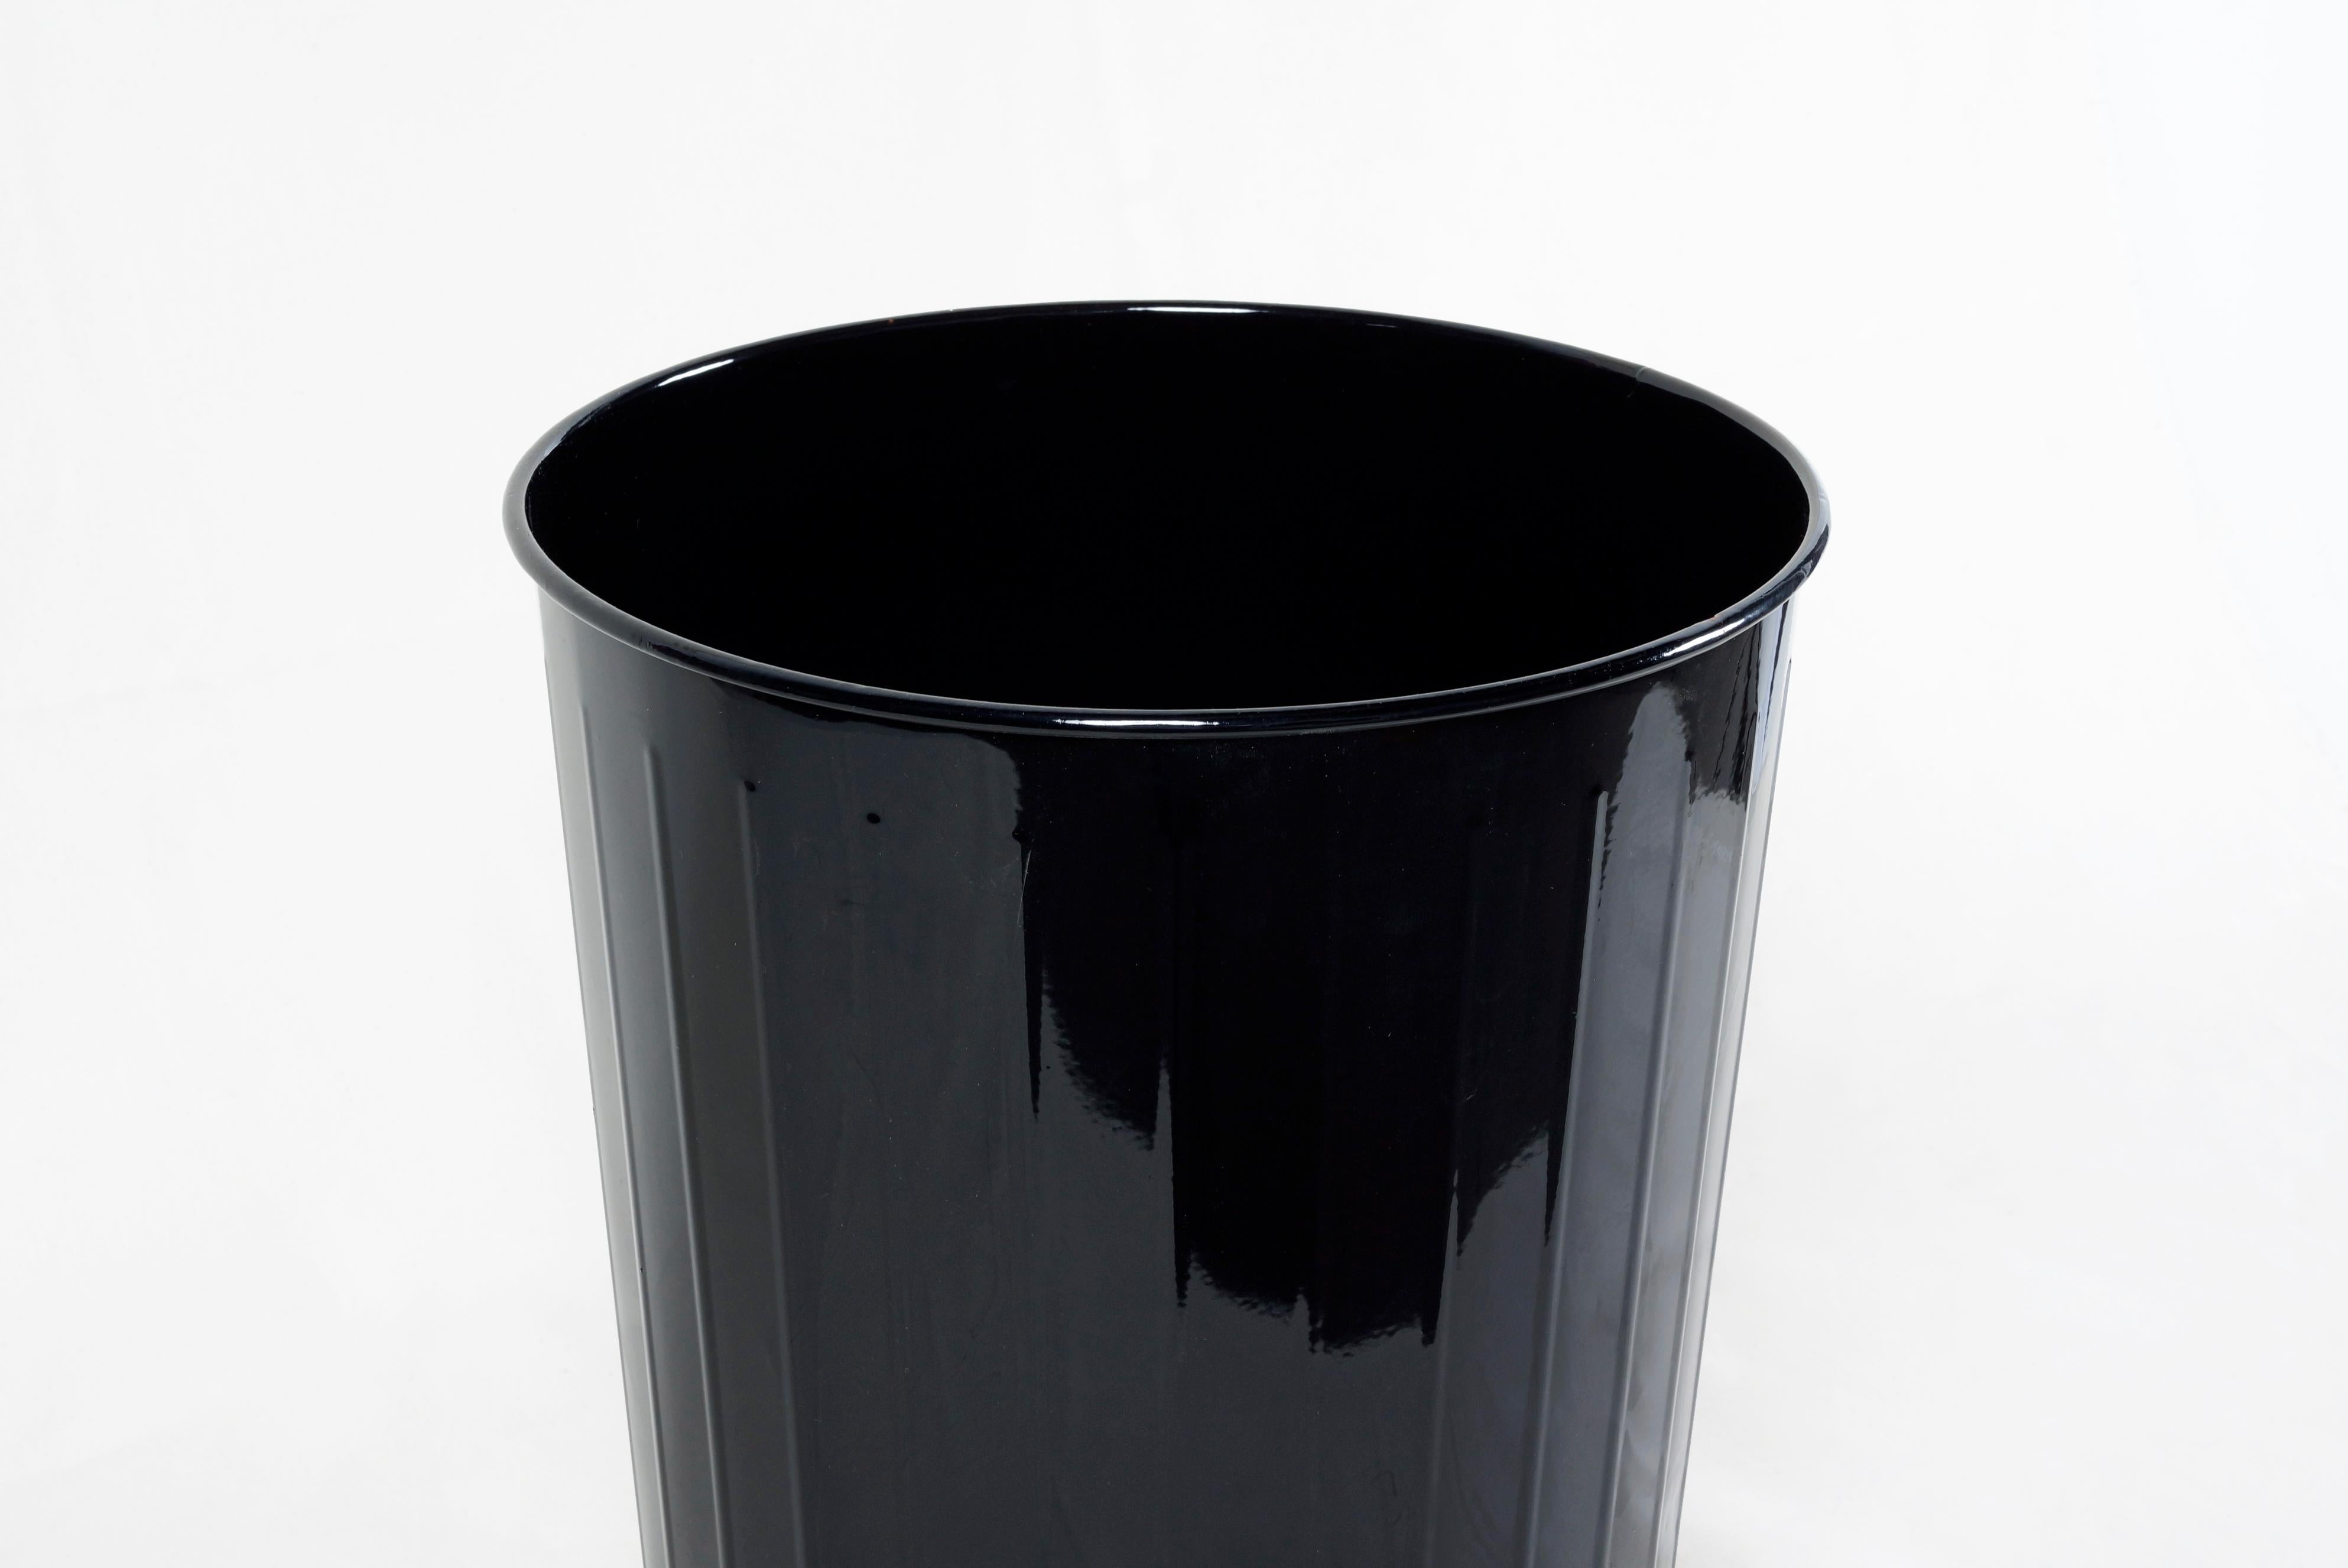 1930s steel waste basket, powder-coated in high-gloss black. An early first design in steel office furniture, the DeWitt waste basket was essential to protect against fires in the new turn-of-the-century high rise buildings. A Classic accessory,